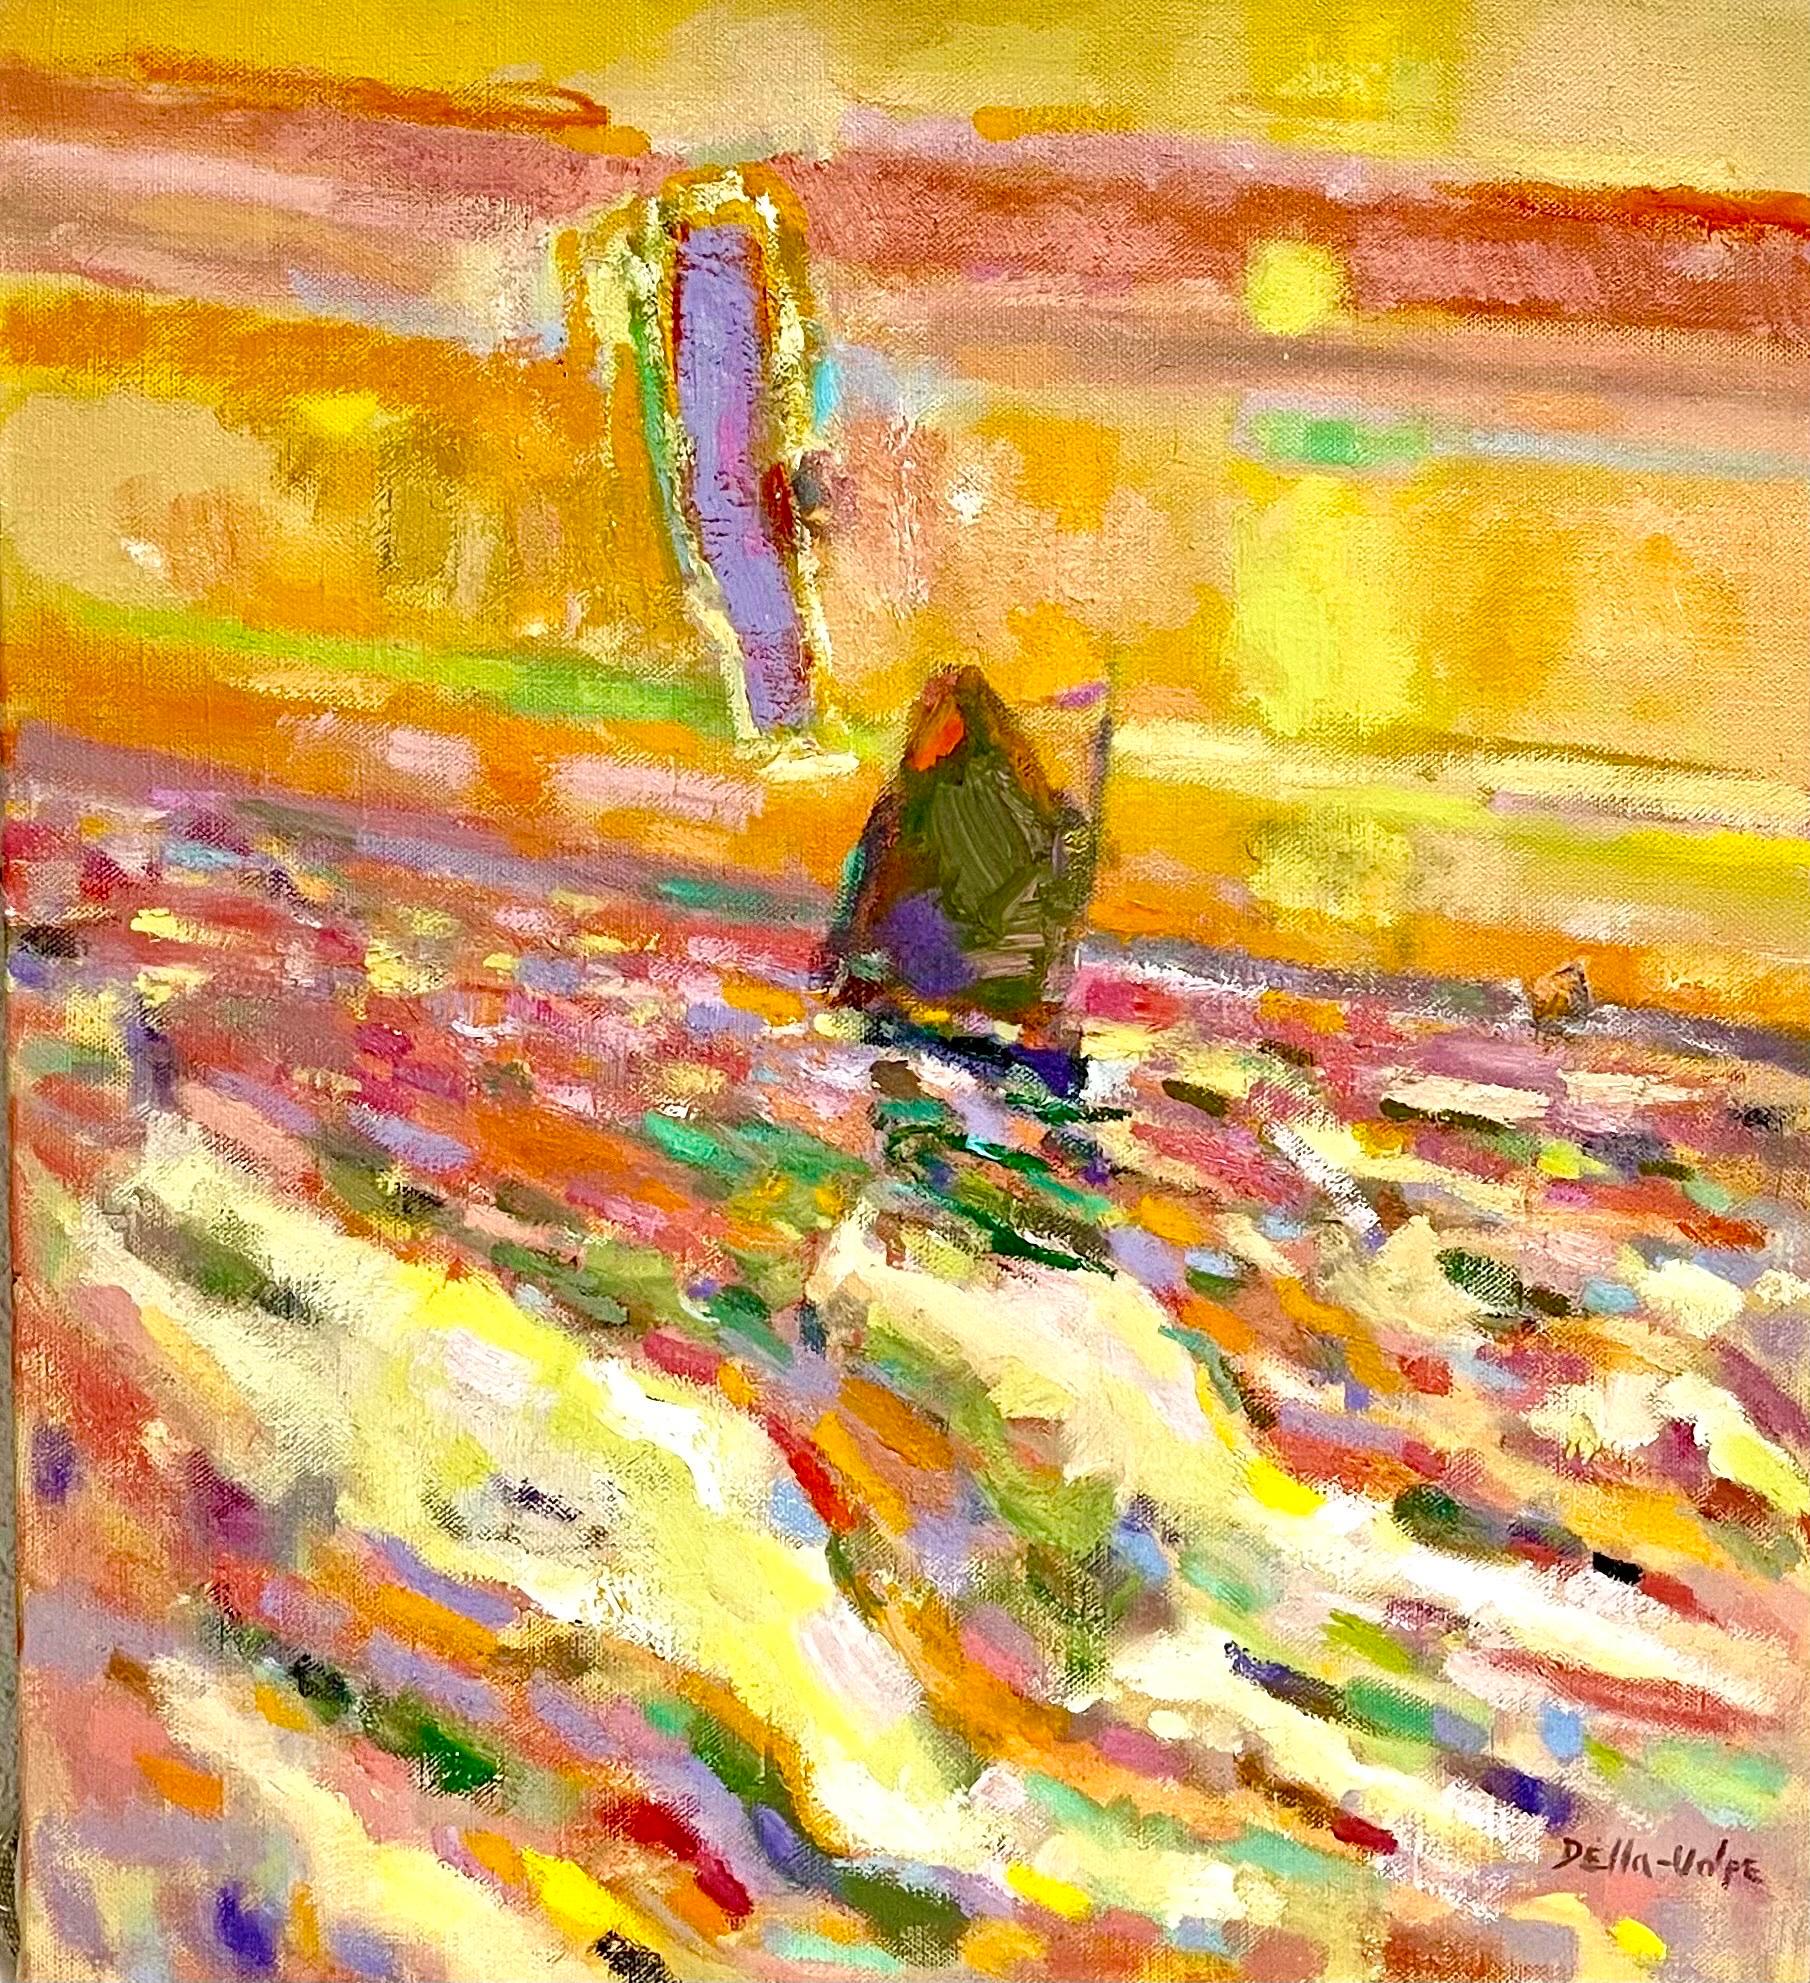 Modernist Abstract Oil Painting Marine Seascape Sunset w Boat Ralph Della Volpe